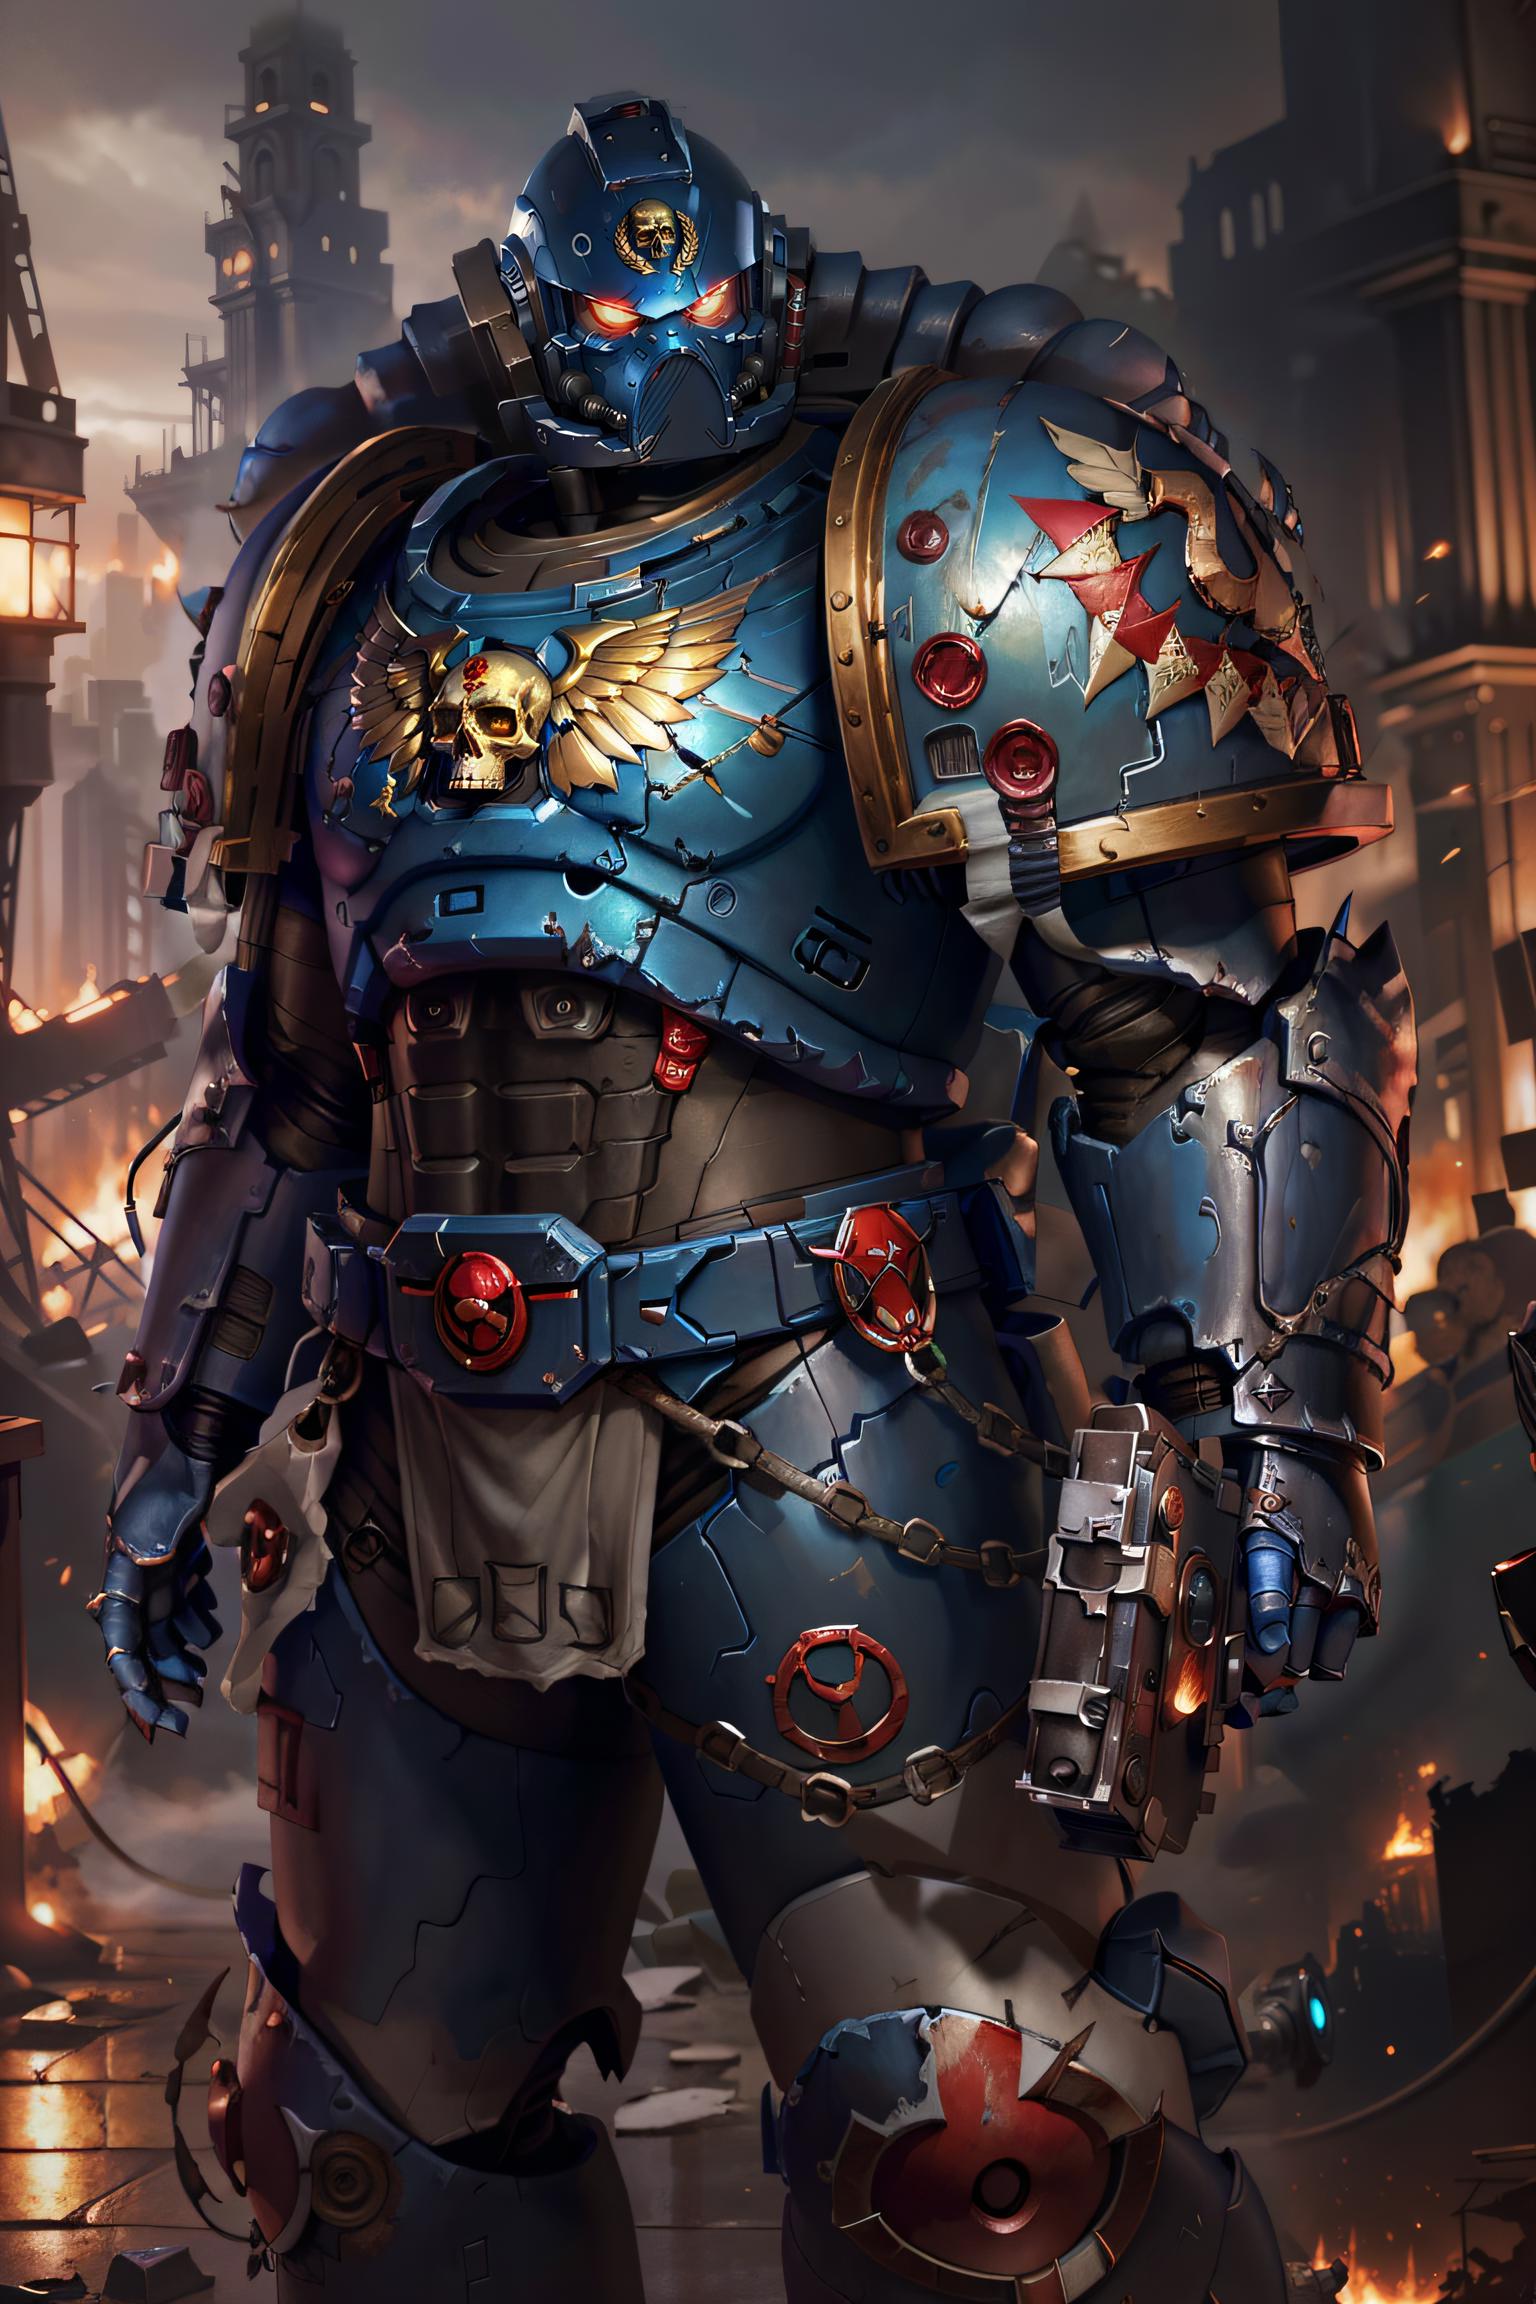 Warrior in Blue Armor with Skull Emblem and Chains.